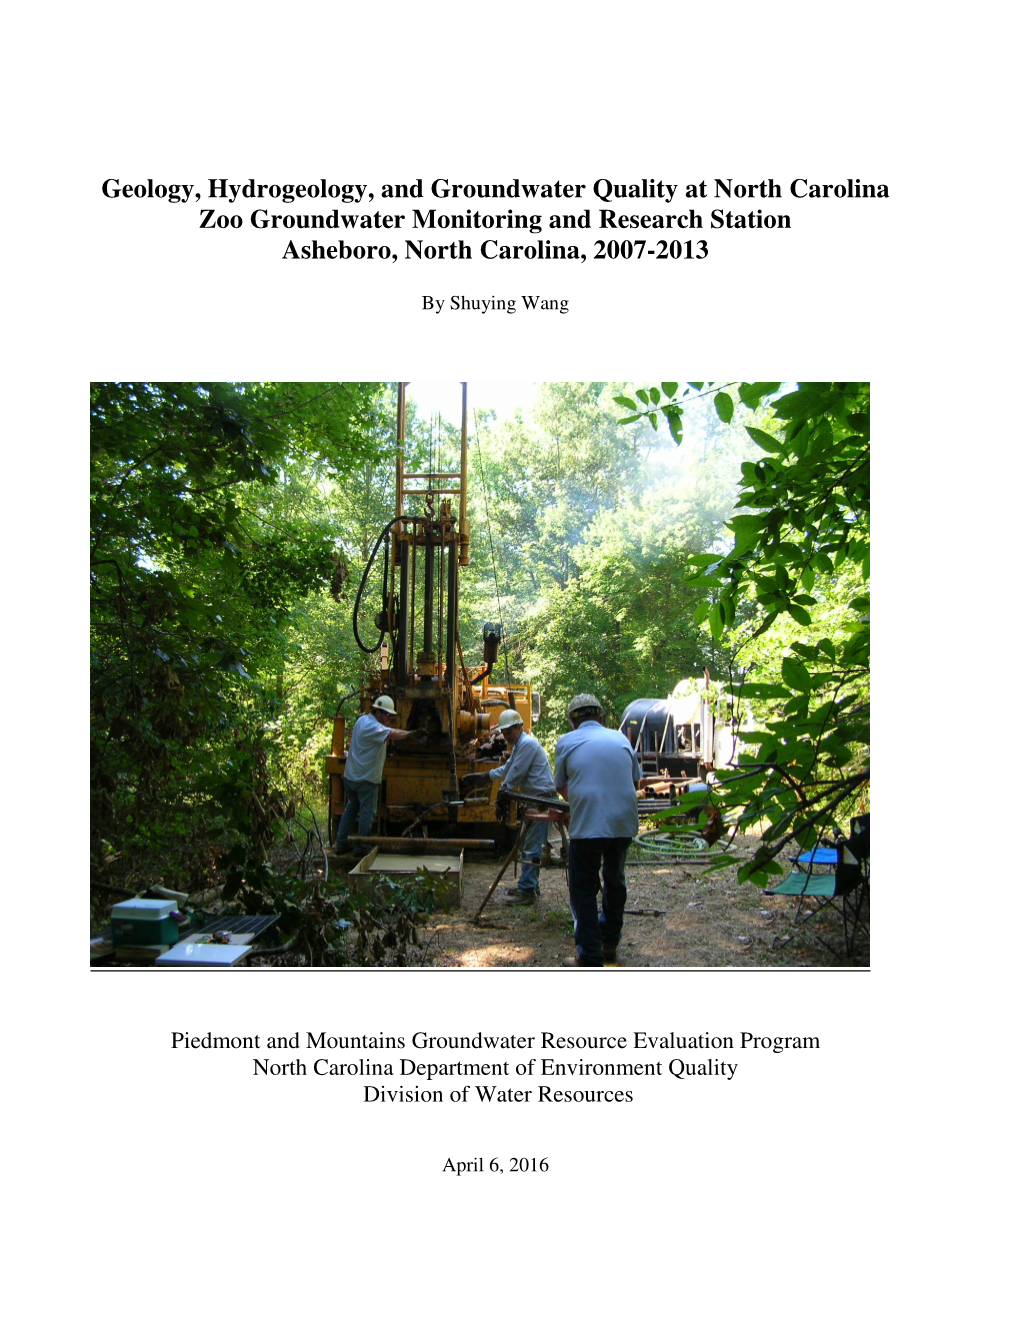 Geology, Hydrogeology, and Groundwater Quality at North Carolina Zoo Groundwater Monitoring and Research Station Asheboro, North Carolina, 2007-2013